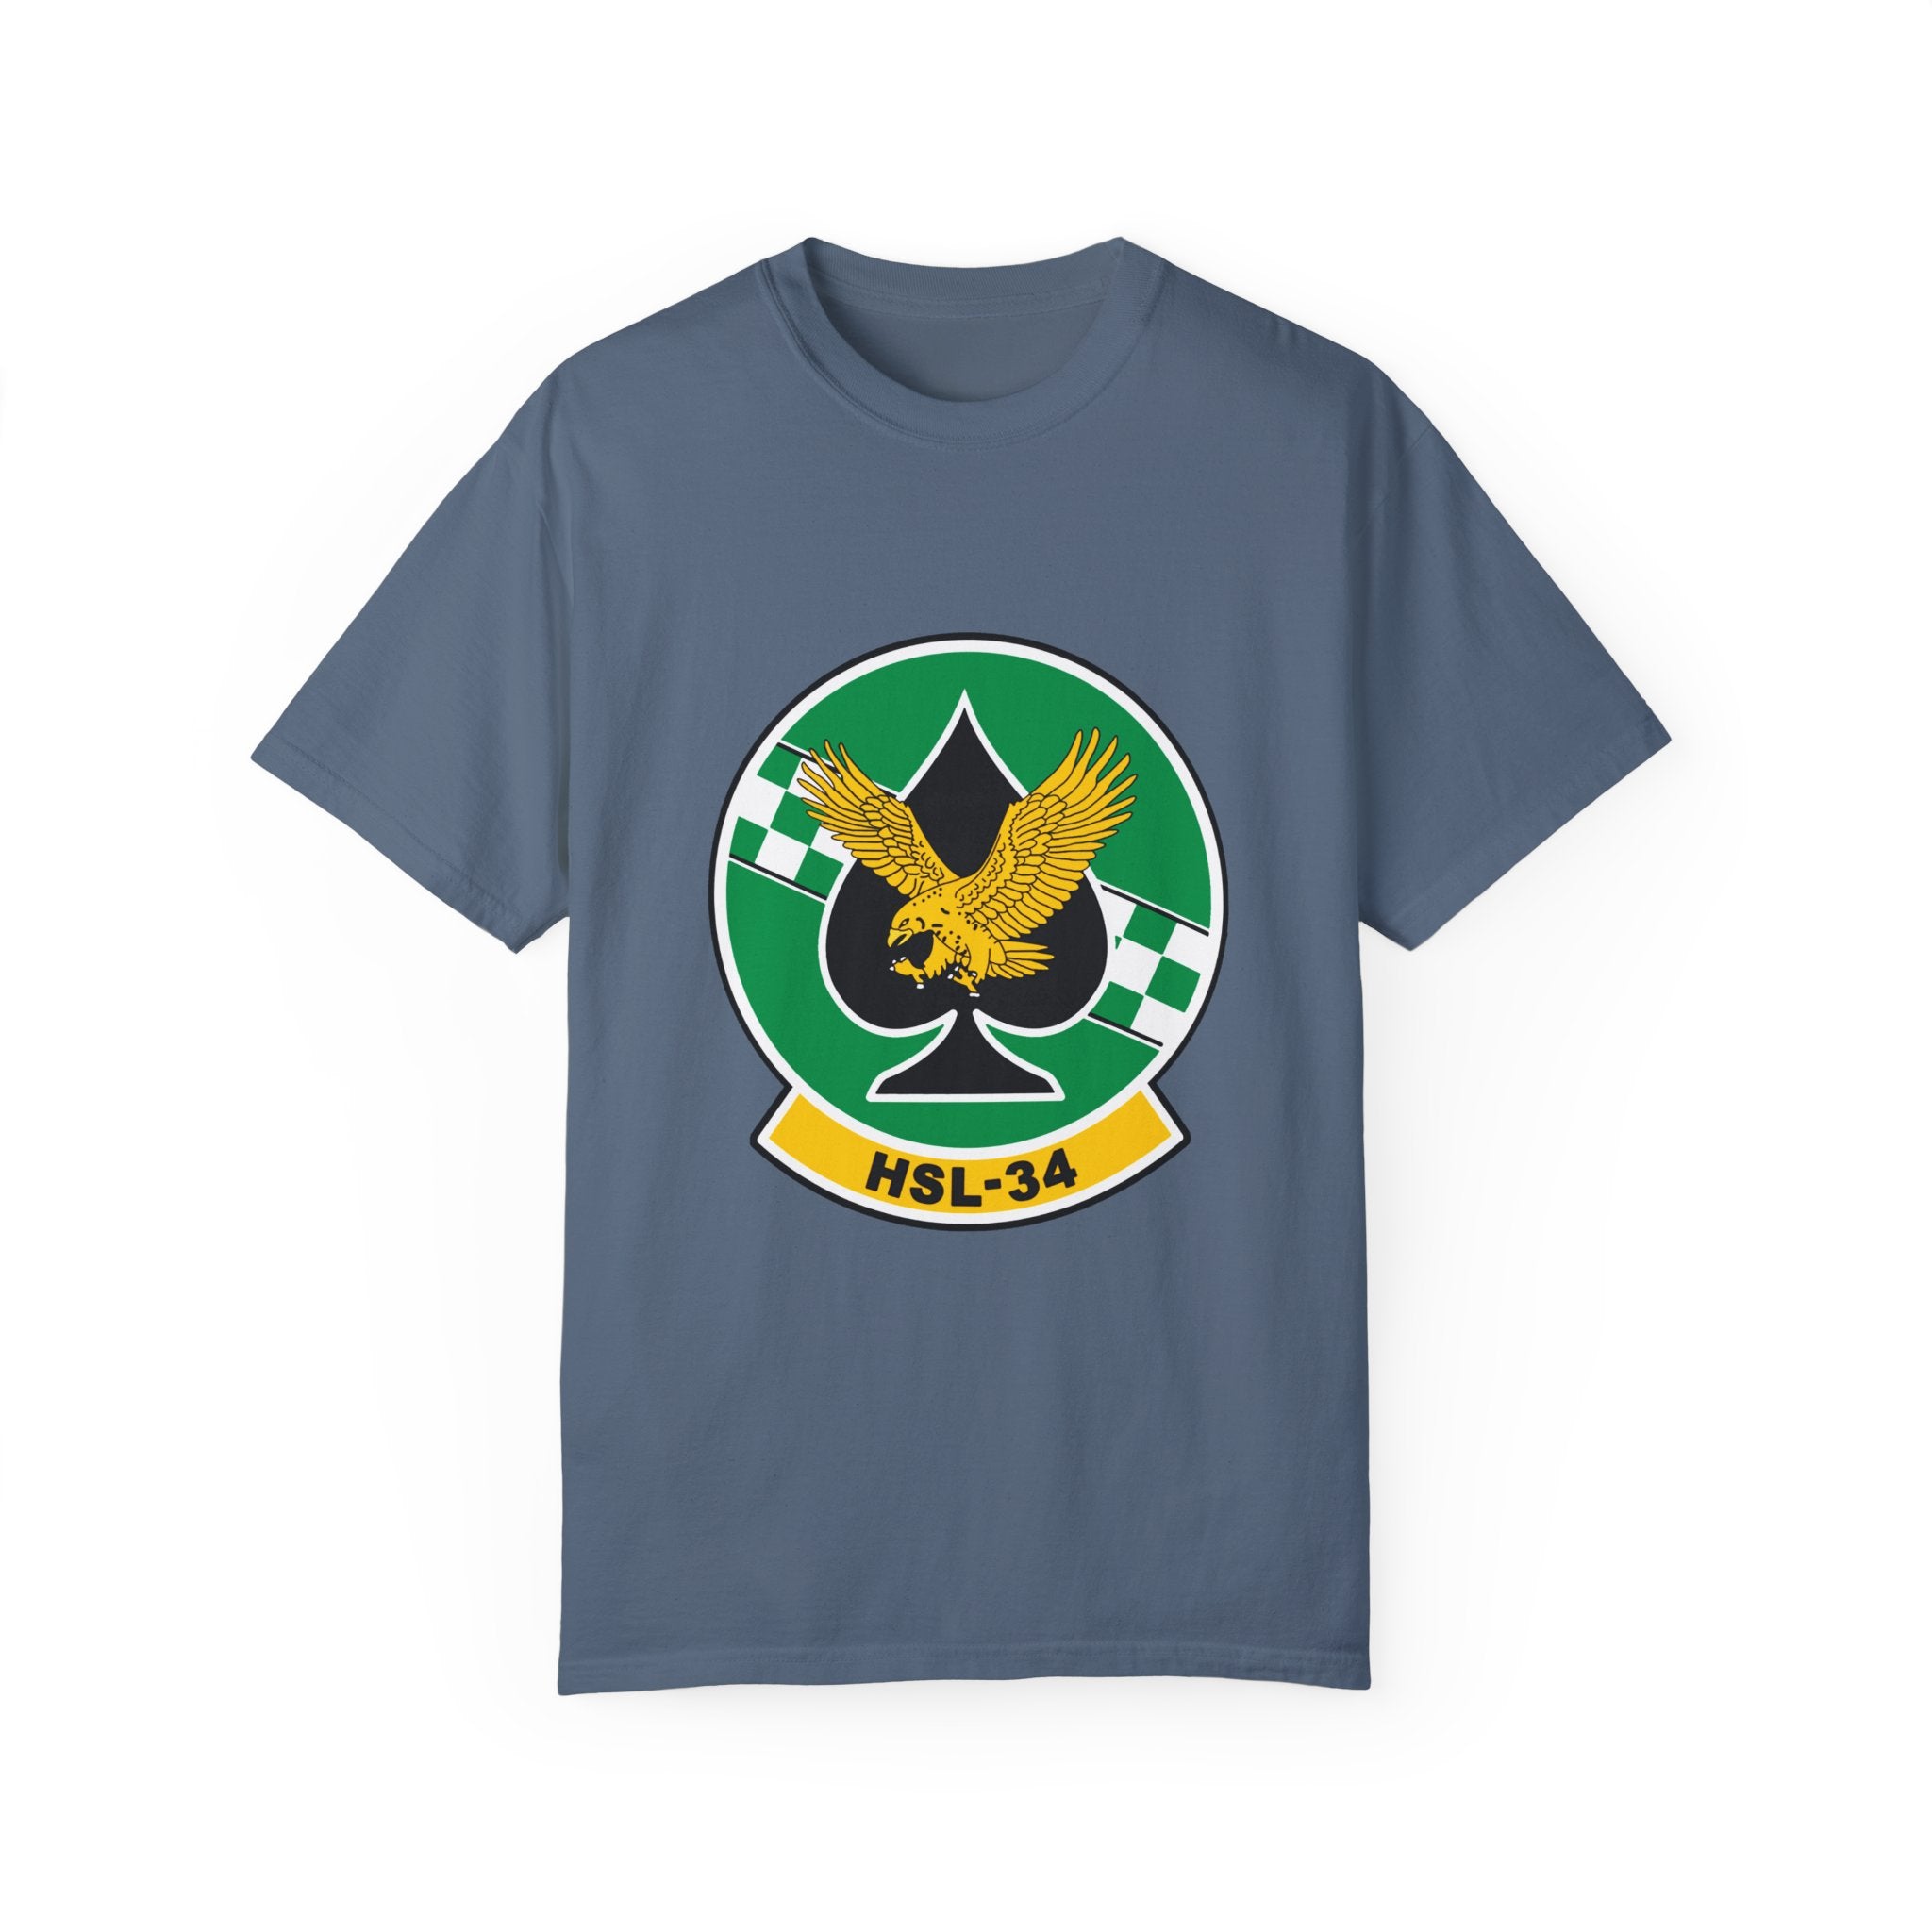 HSL-34 "Greencheckers" T-Shirt, Navy Helicopter Antisubmarine Squadron (Light) flying the SH-2 Seasprite